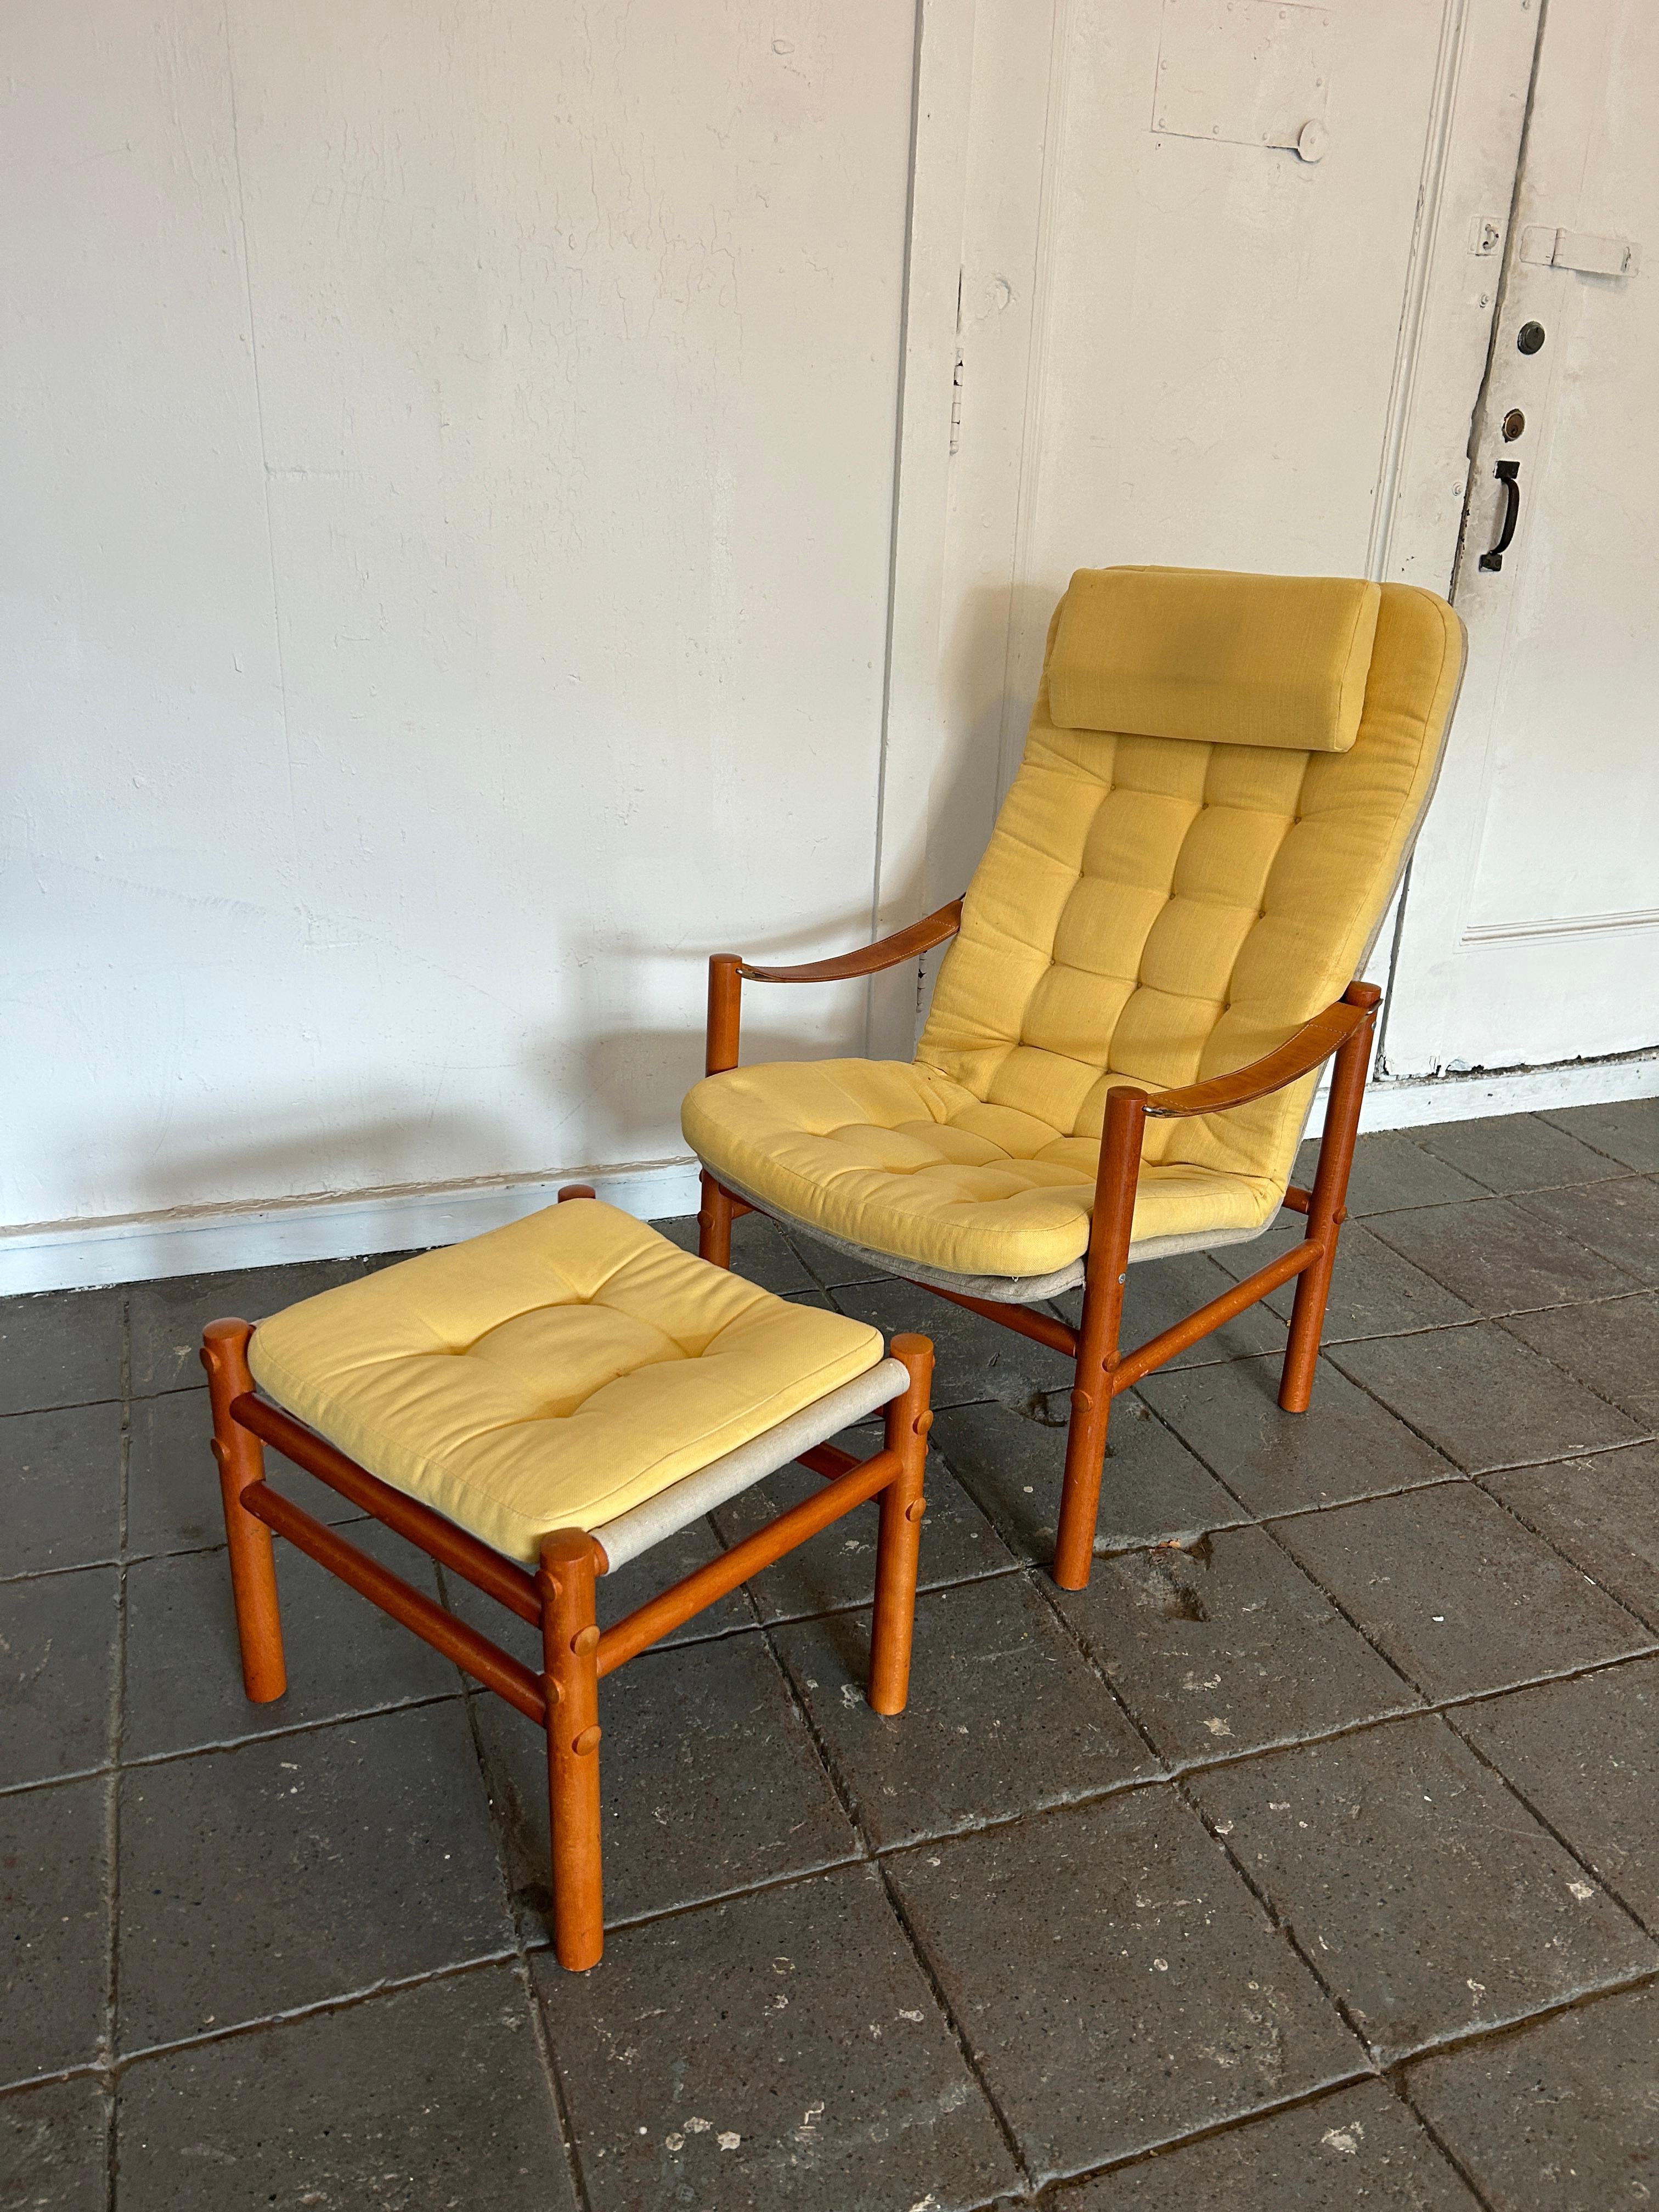 Scandinavian modern teak leather safari lounge chair with ottoman yellow upholstery. Very clean chair with thick leather strap armrests and solid teak frame. Chair and ottoman combination. Made in Norway. Located in Brooklyn NYC.

Chair measures